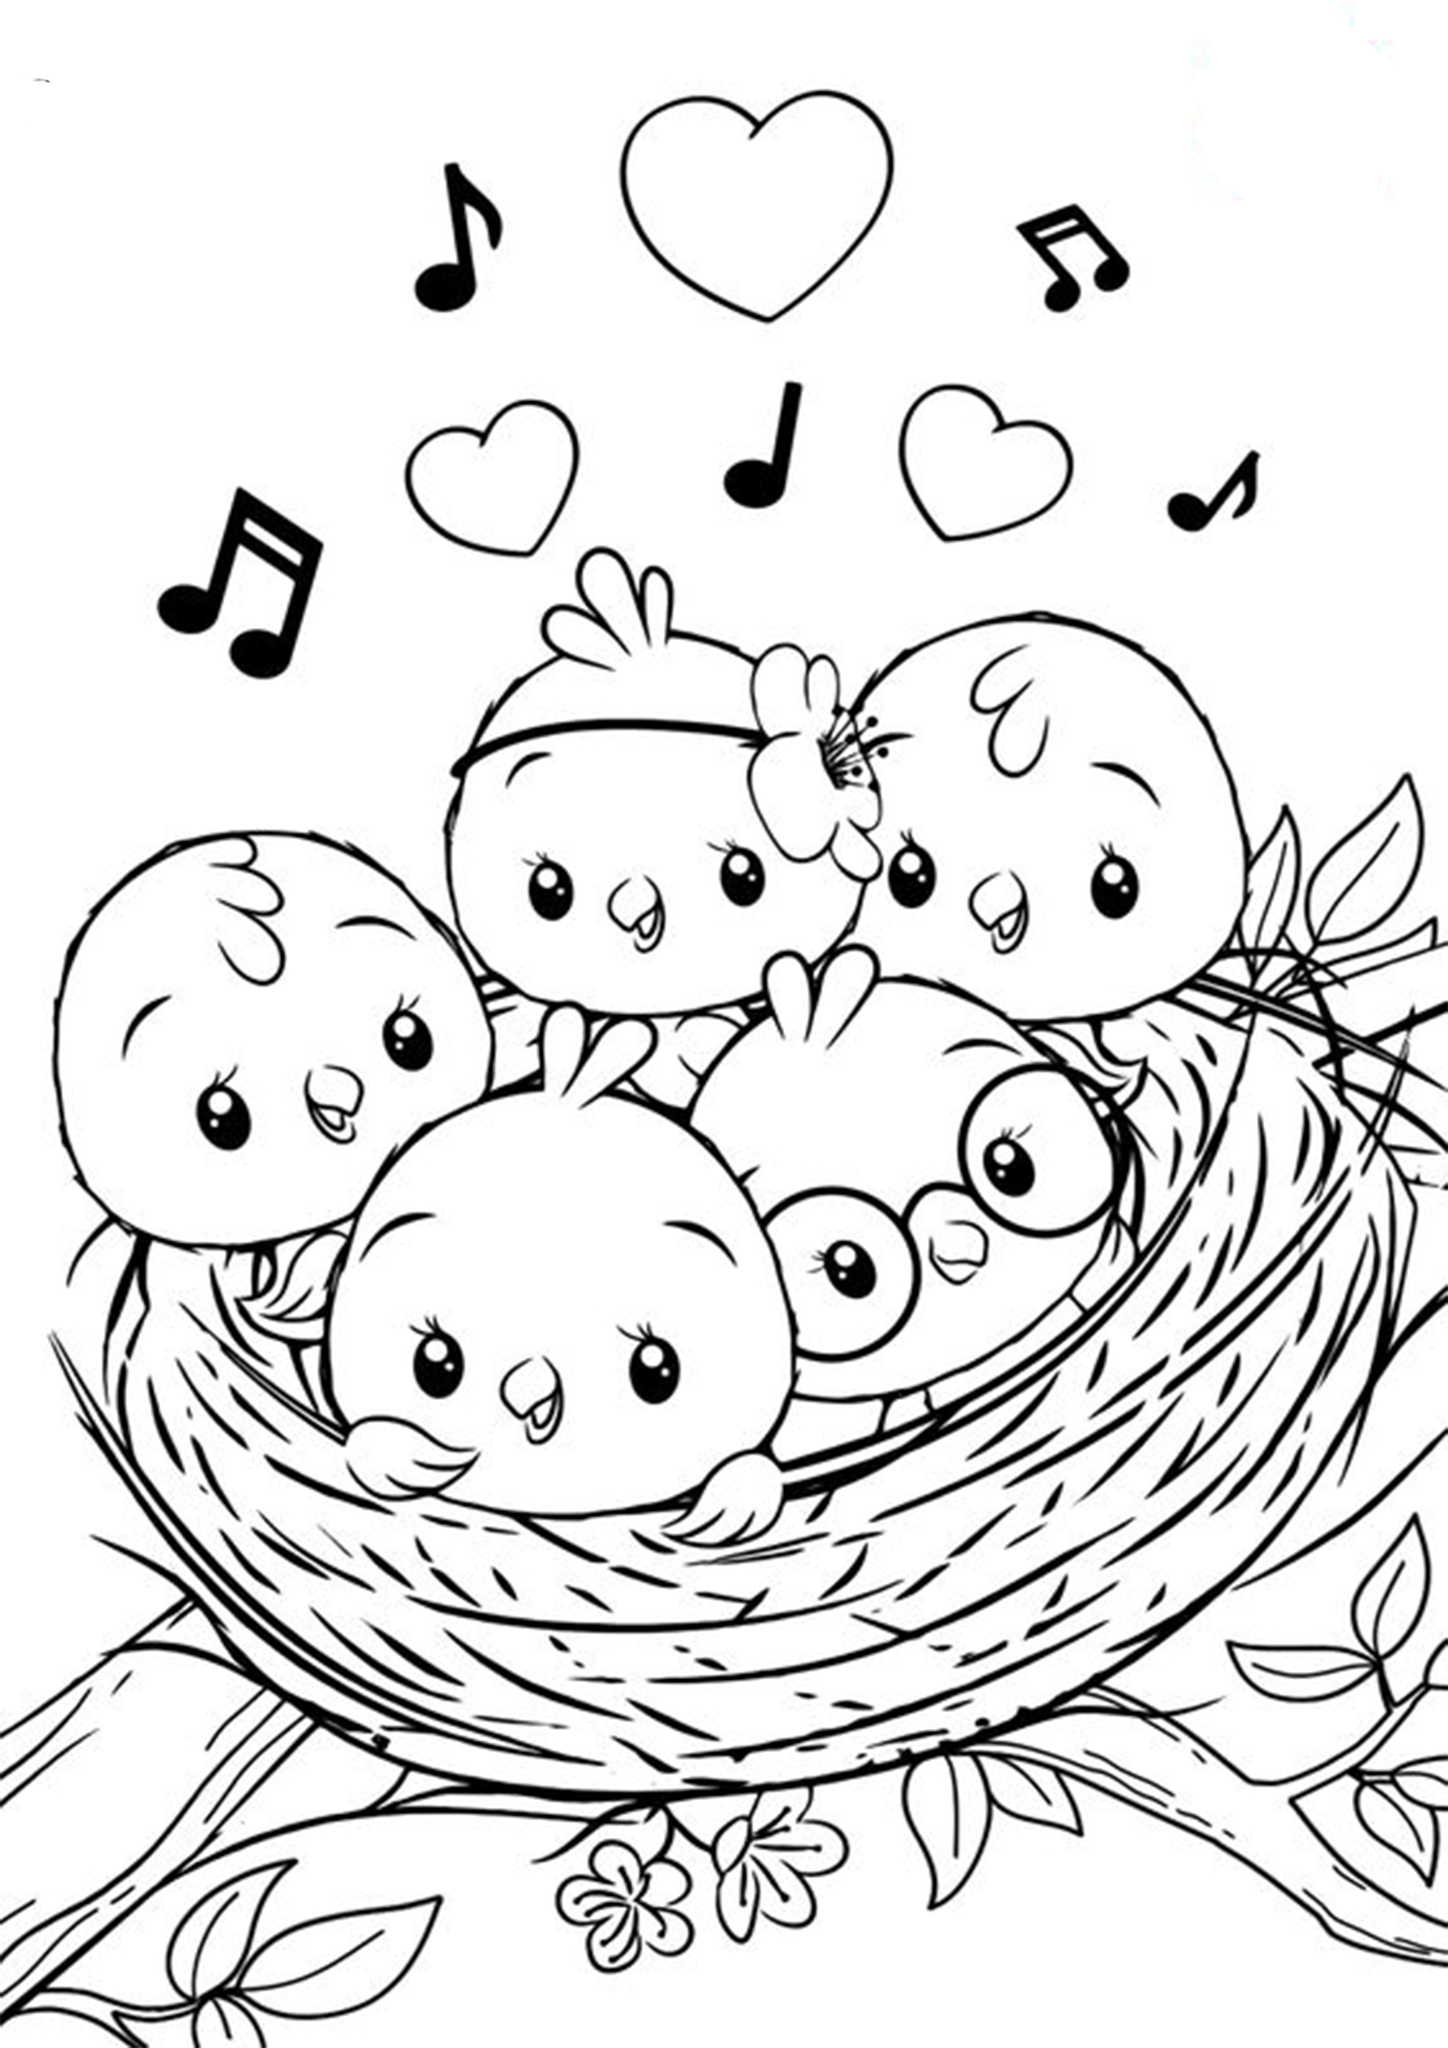 Cute Birds Coloring Pages - Coloring Home